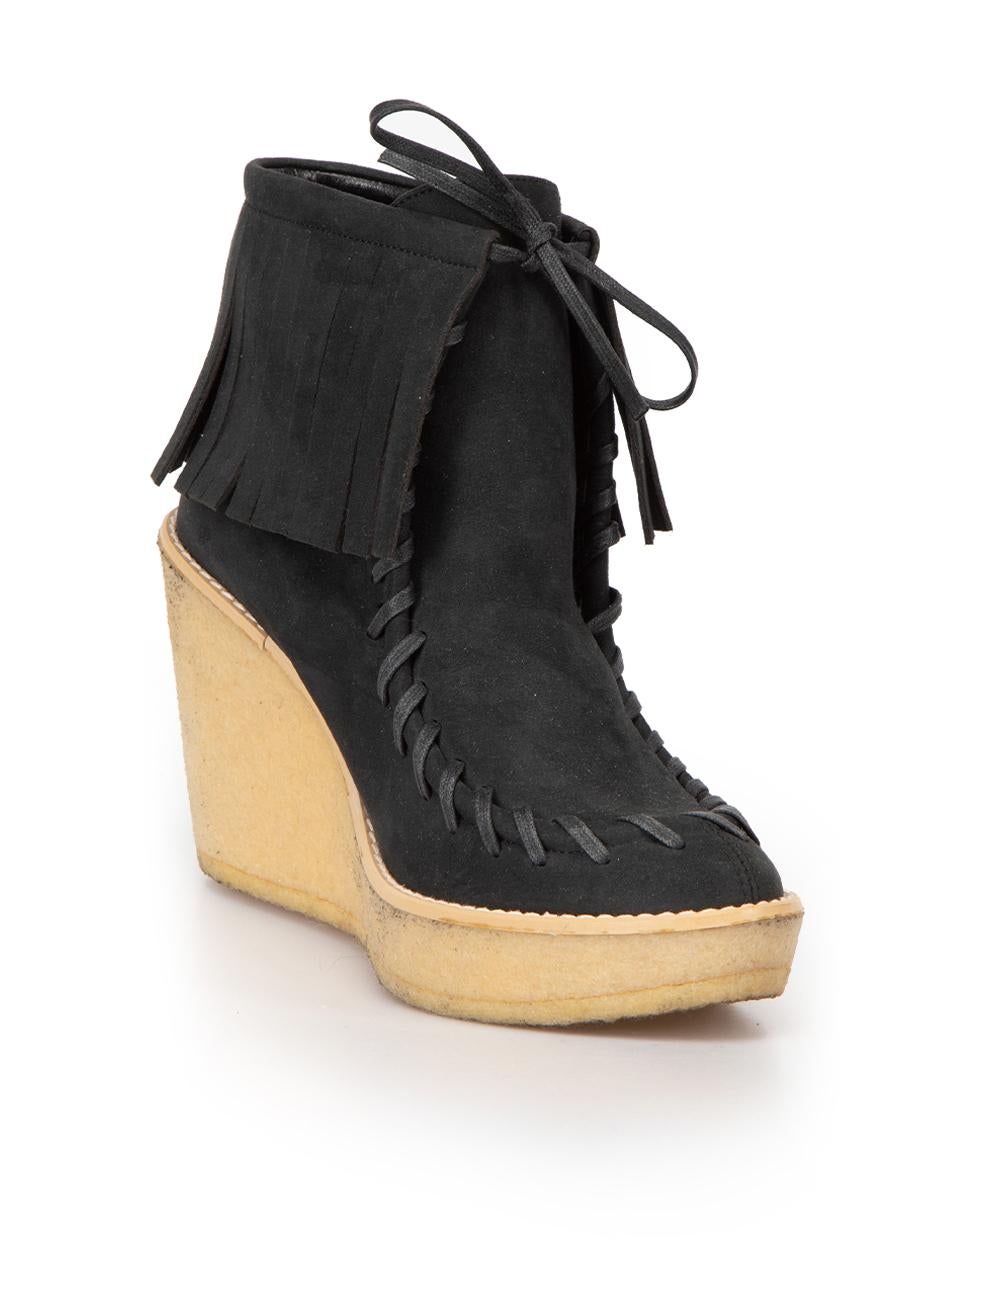 CONDITION is Good. Minor wear to boots is evident. Light wear to the rubber wedge sole with marks on both boots on this used Stella McCartney designer resale item. 



Details


Black

Vegan suede

Ankle boots

Weaved lace accent with tassels